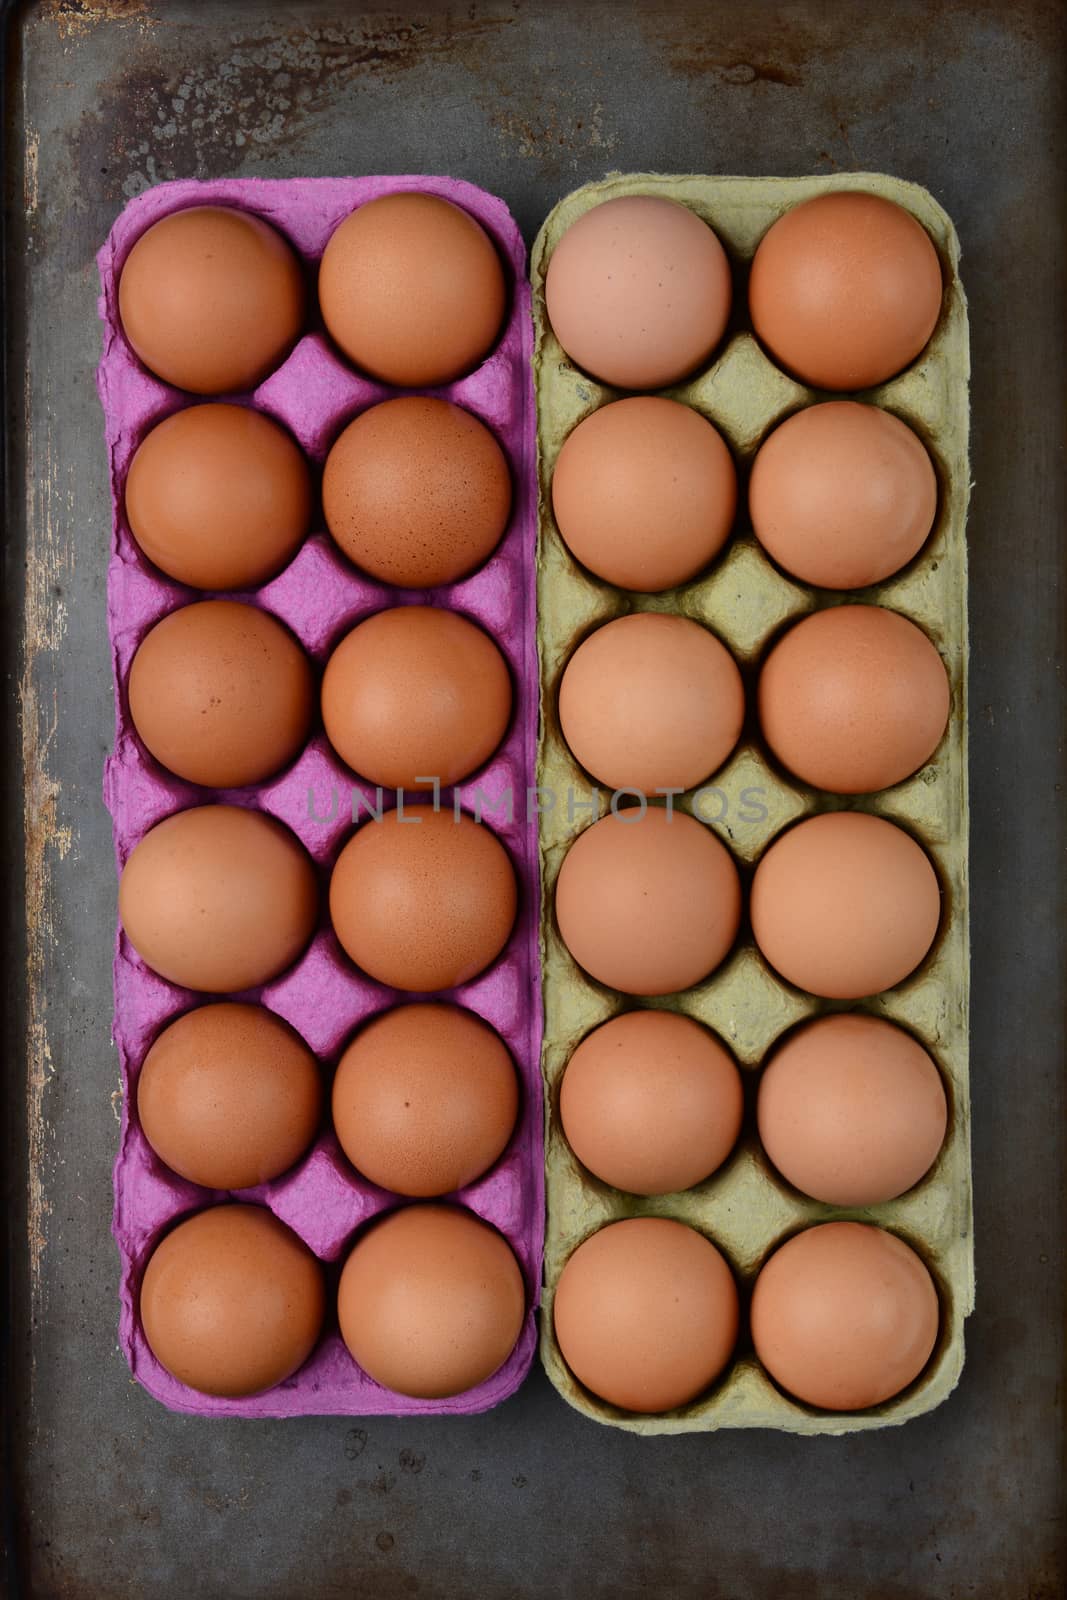 High angle shot of two one dozen cartons of organic brown eggs on a well used cooking surface.. Vertical format.